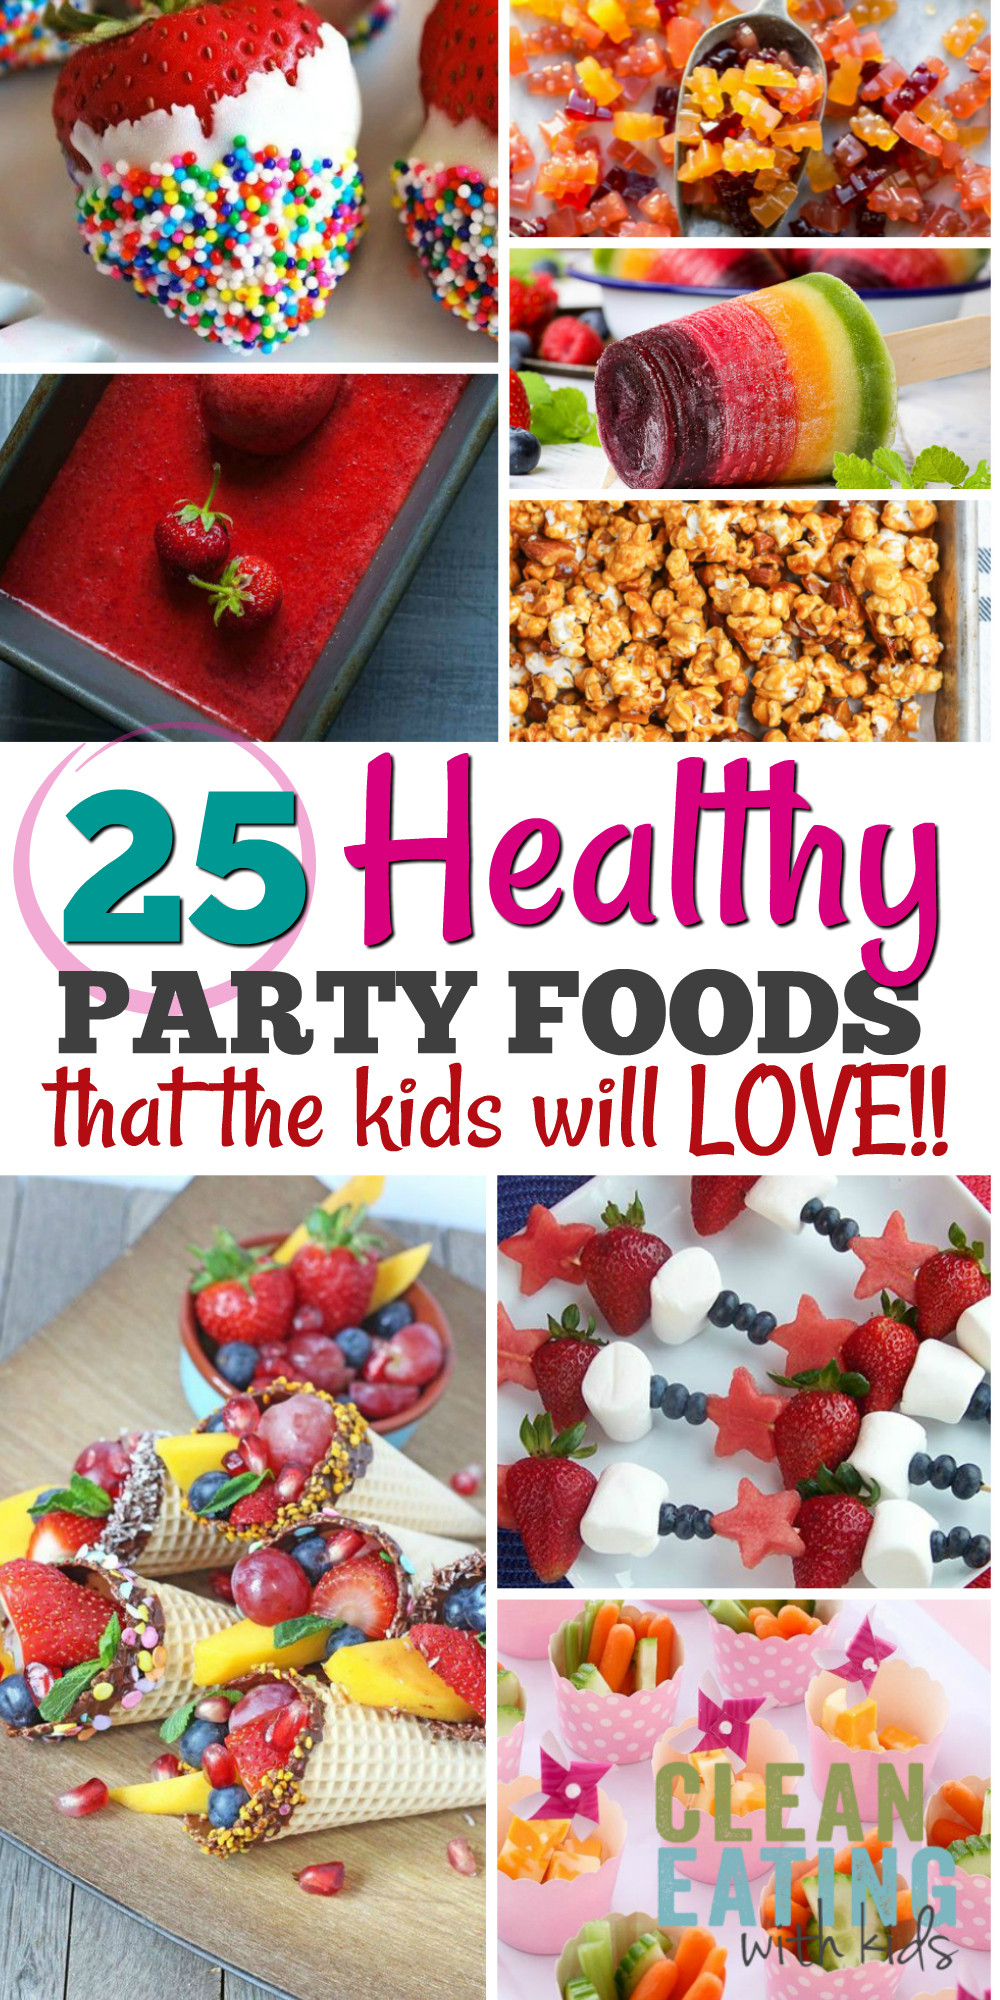 Kid Birthday Party Food
 25 Healthy Birthday Party Food Ideas Clean Eating with kids